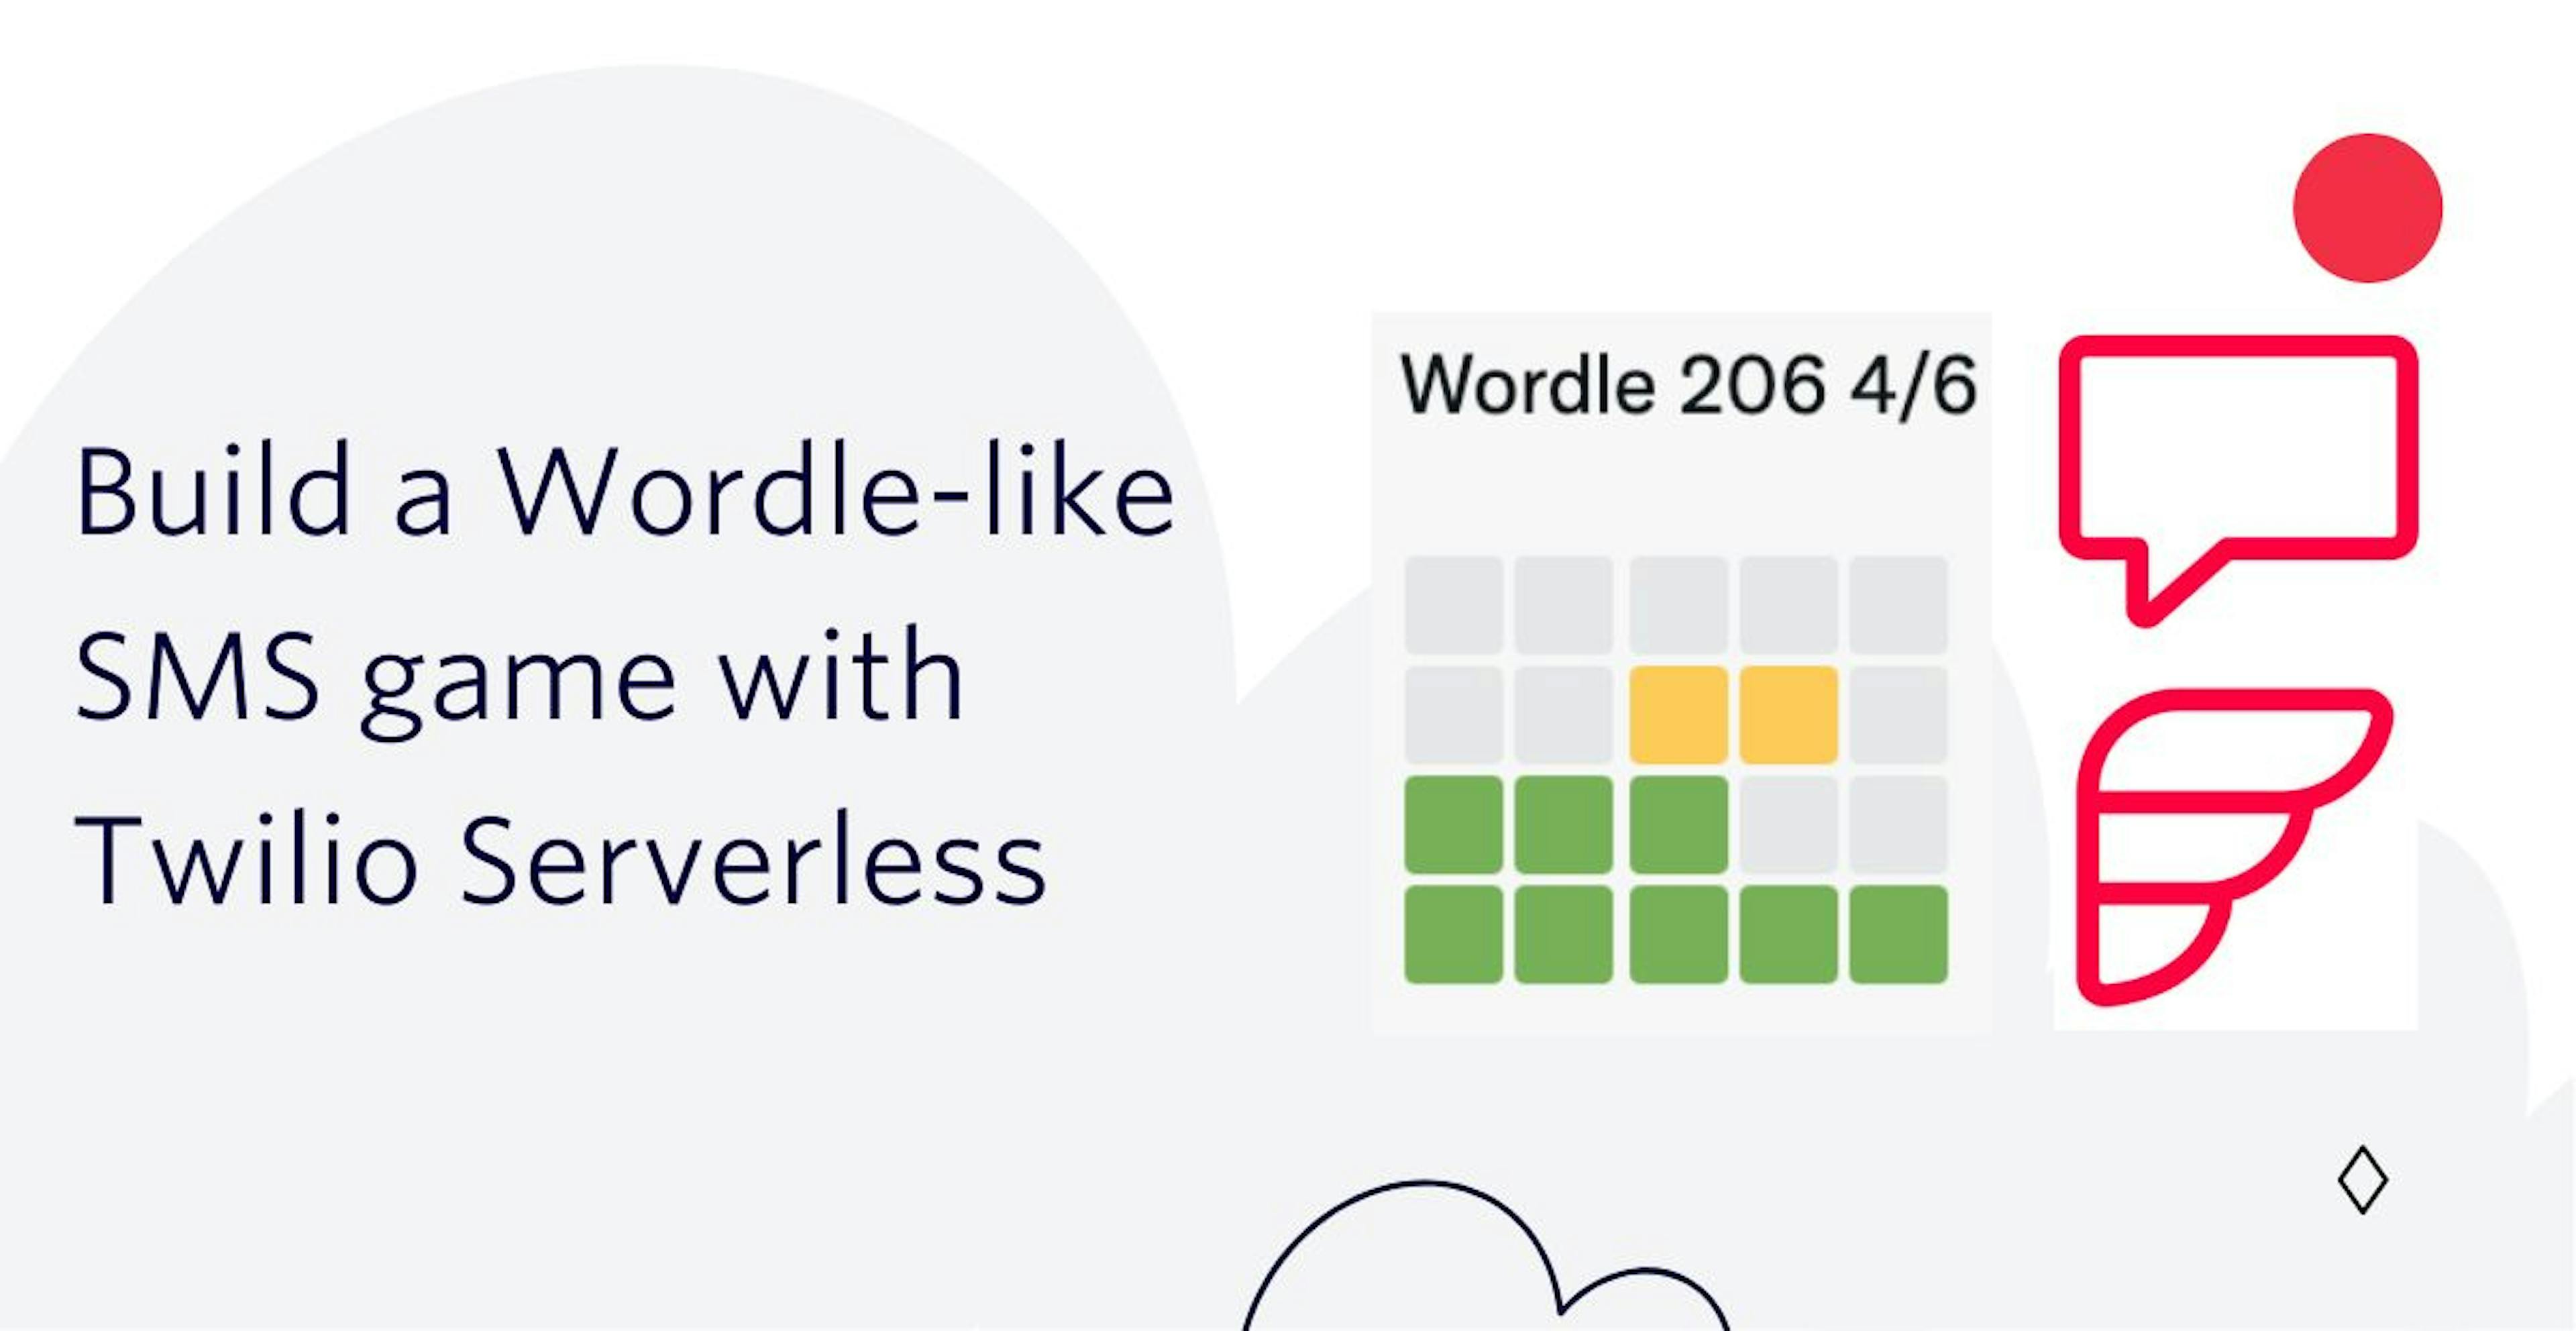 featured image - Build a Wordle-like SMS game with Twilio Serverless in JavaScript